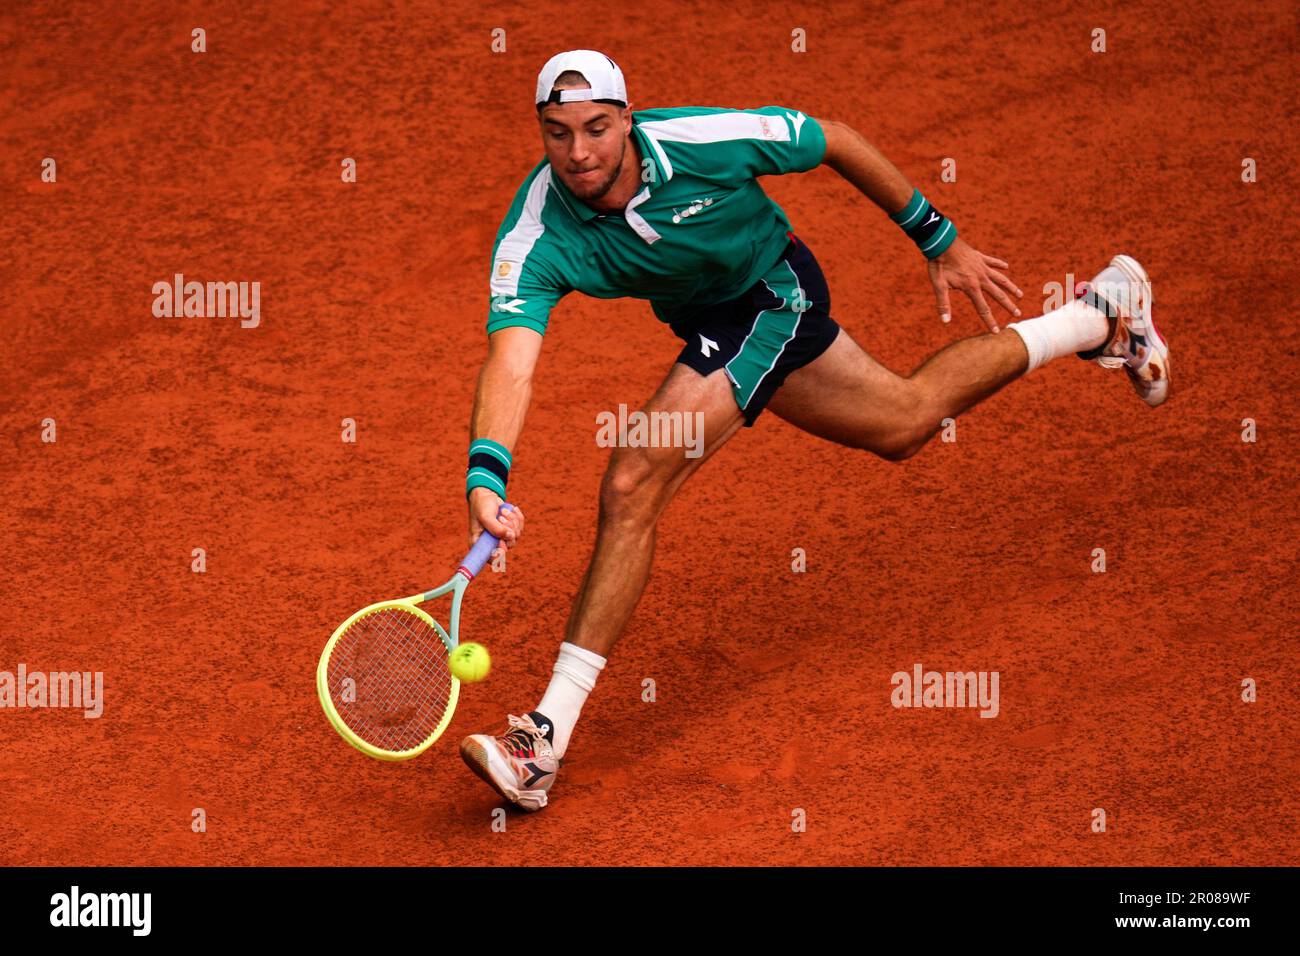 Jan-Lennard Struff, of Germany, returns the ball against Carlos Alcaraz, of Spain, during their mens singles final match at the Madrid Open tennis tournament in Madrid, Spain, Sunday, May 7, 2023